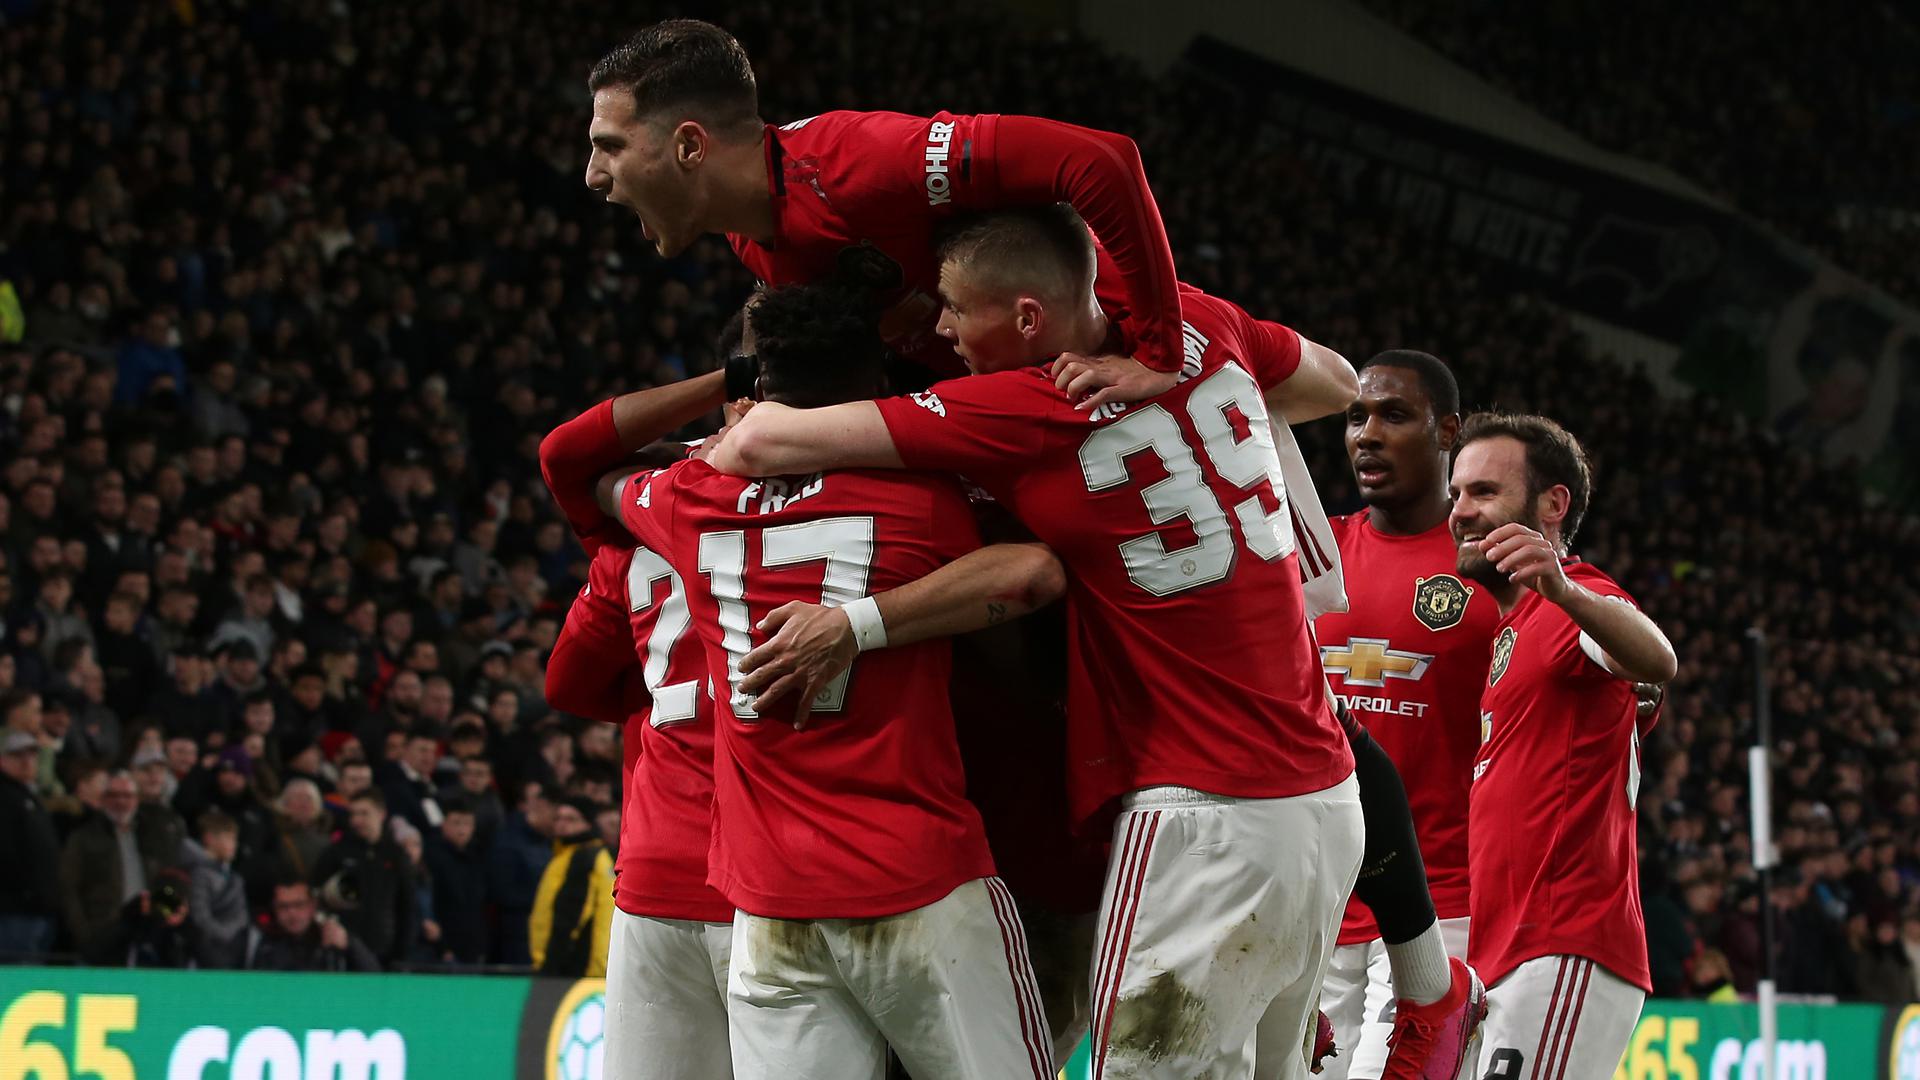 Manchester united vs derby county live stream